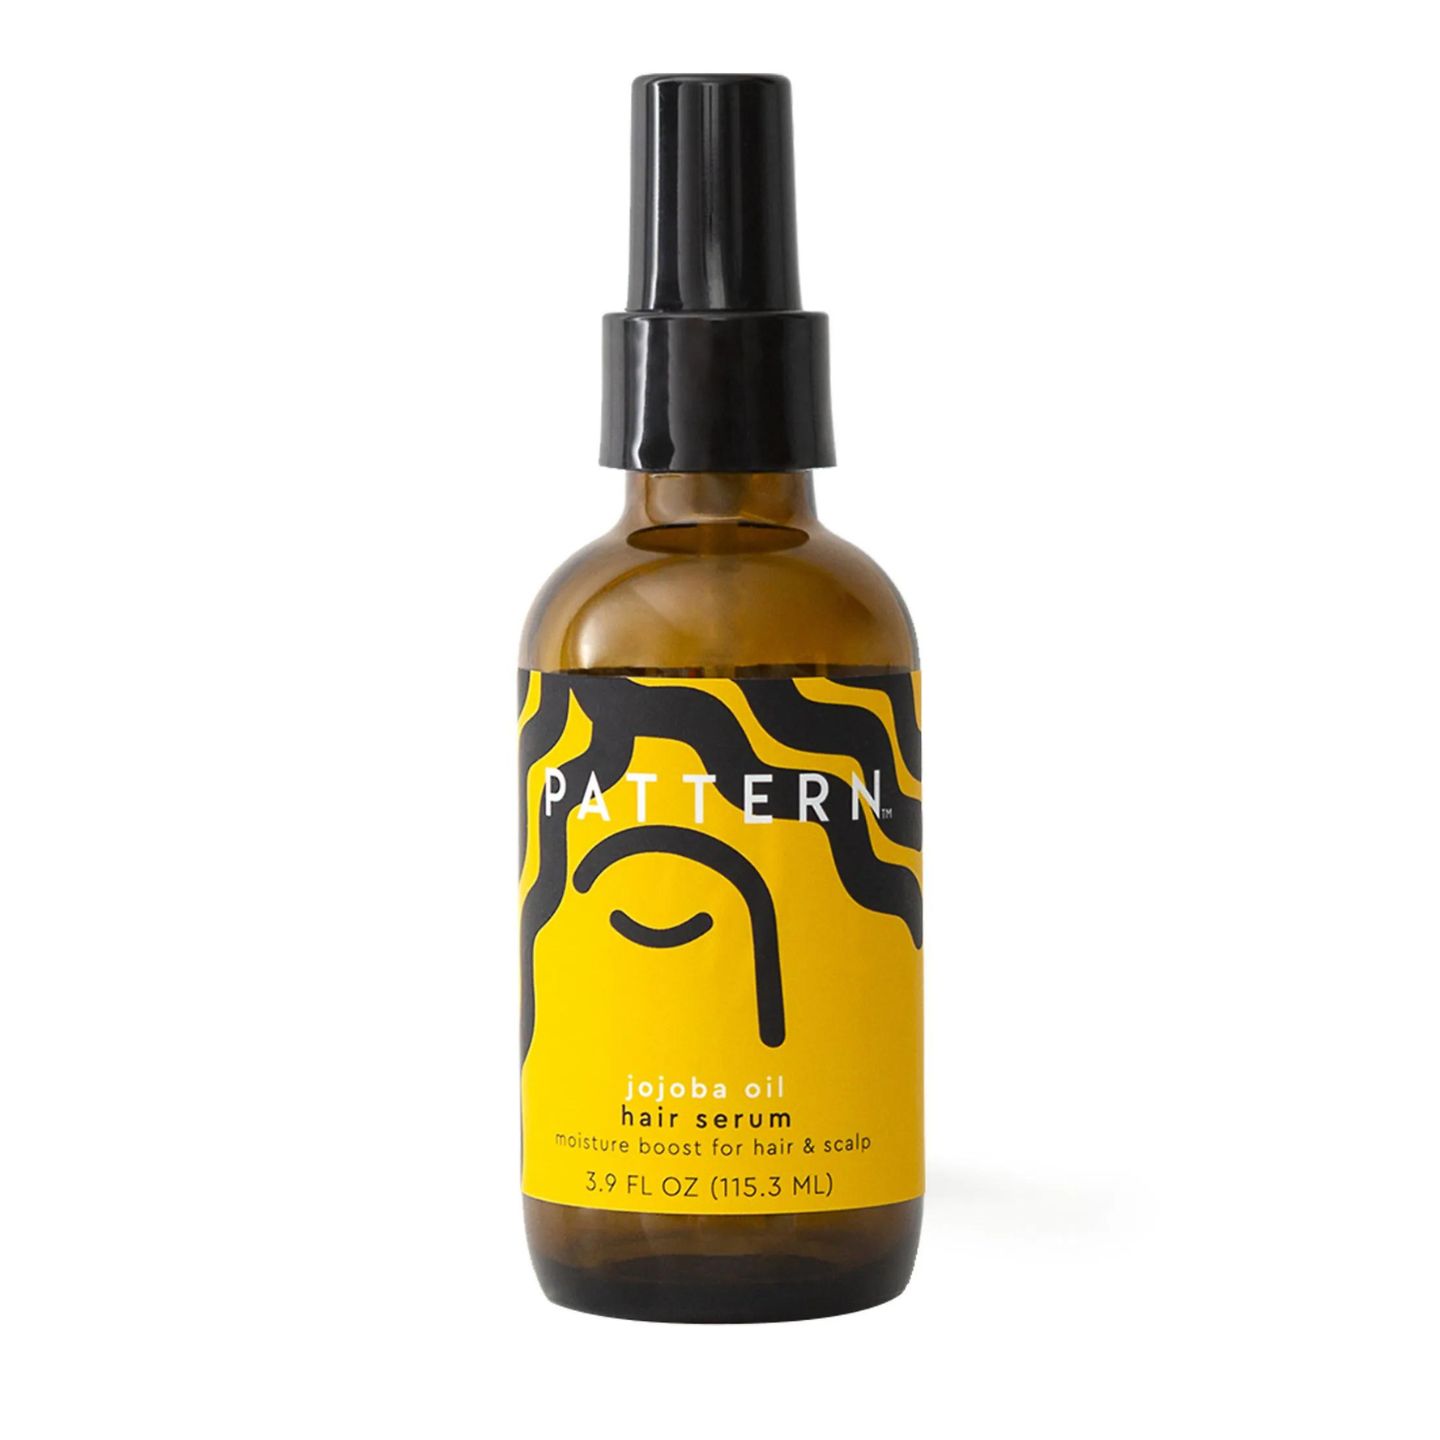 This luxury oil will keep your scalp hydrated and prevent any hair breakage caused by extremely dry climates. Pattern Jojoba Hair and Scalp Oil Blend, $32 for 115ml, sephora.com